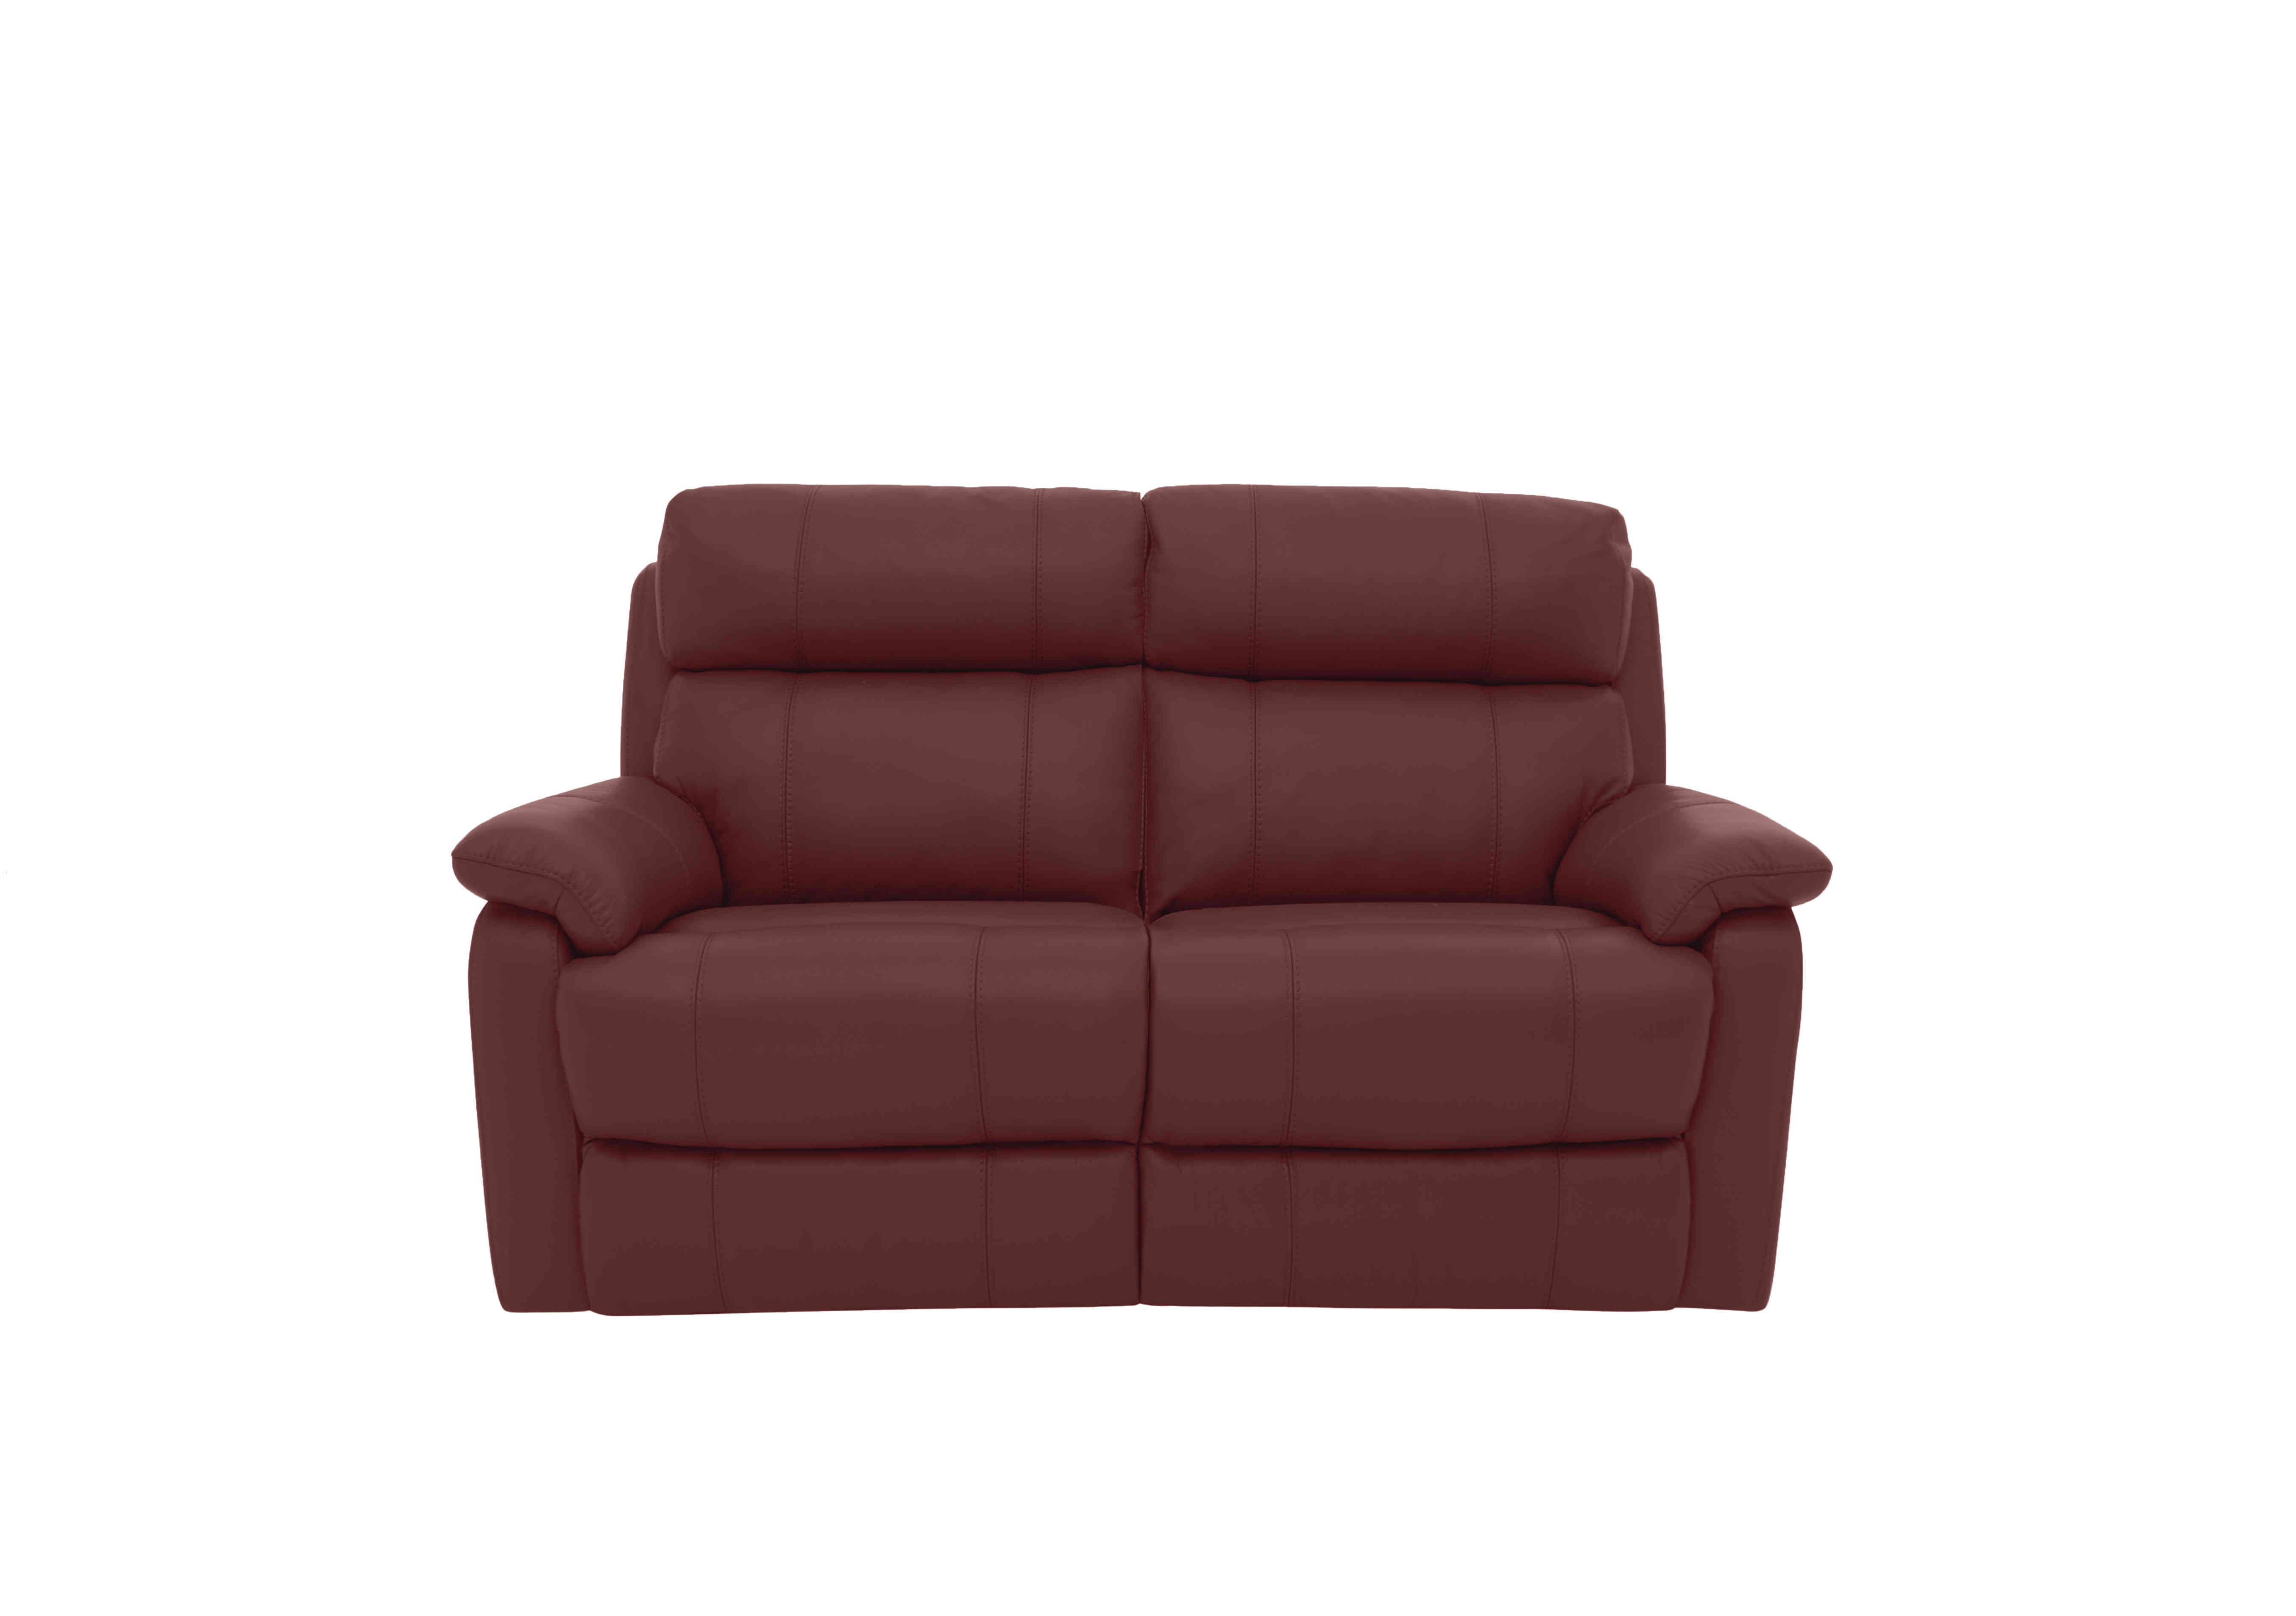 Relax Station Komodo 2 Seater Power Leather Sofa in Bv-035c Deep Red on Furniture Village